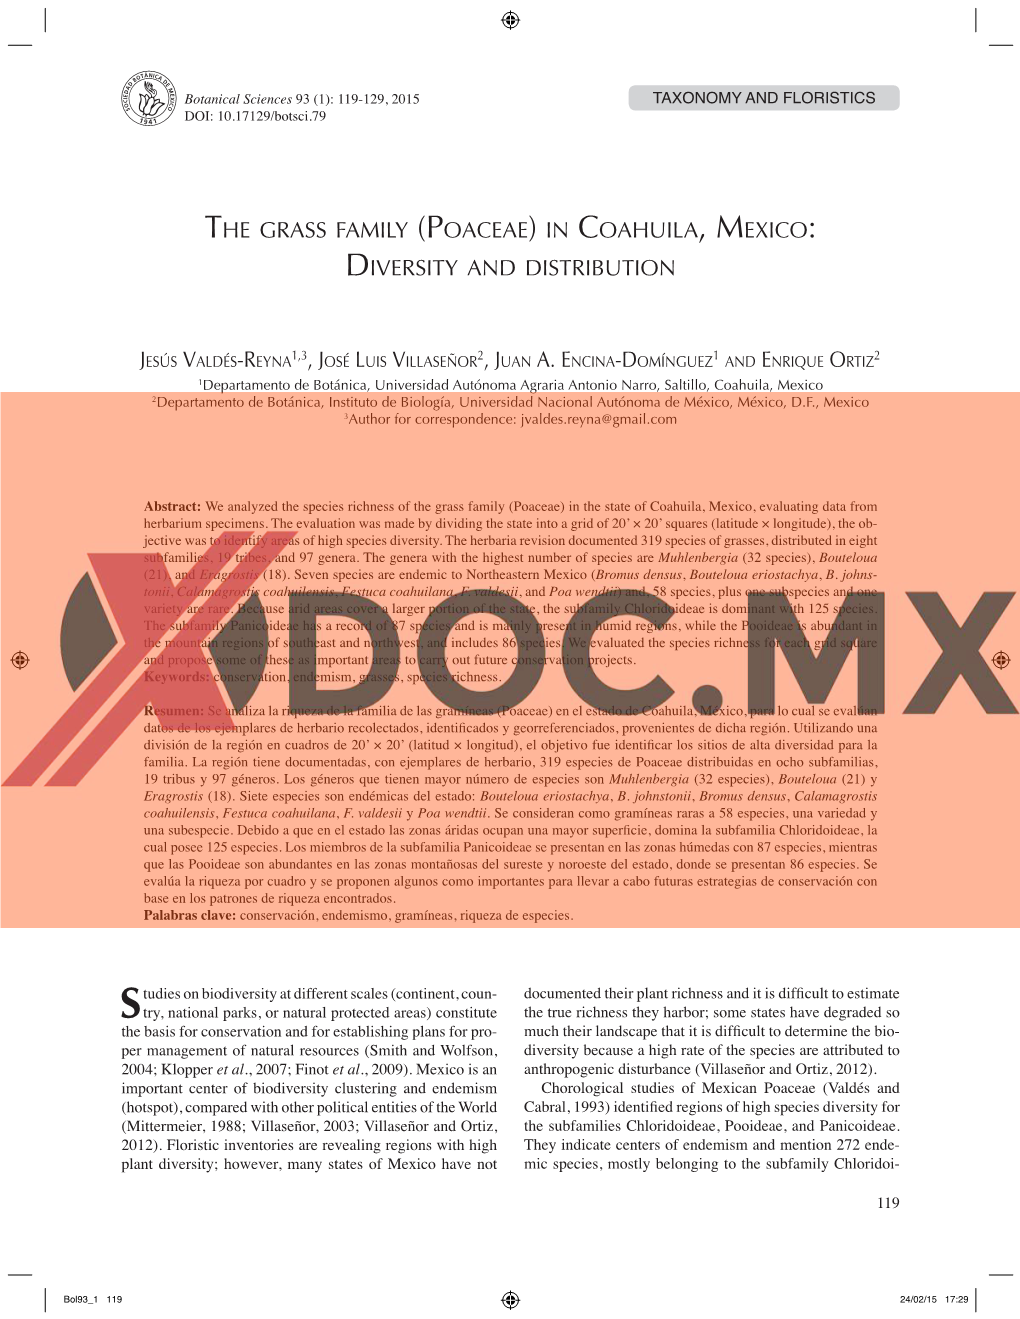 The Grass Family (Poaceae) in Coahuila, Mexico: Diversity and Distribution